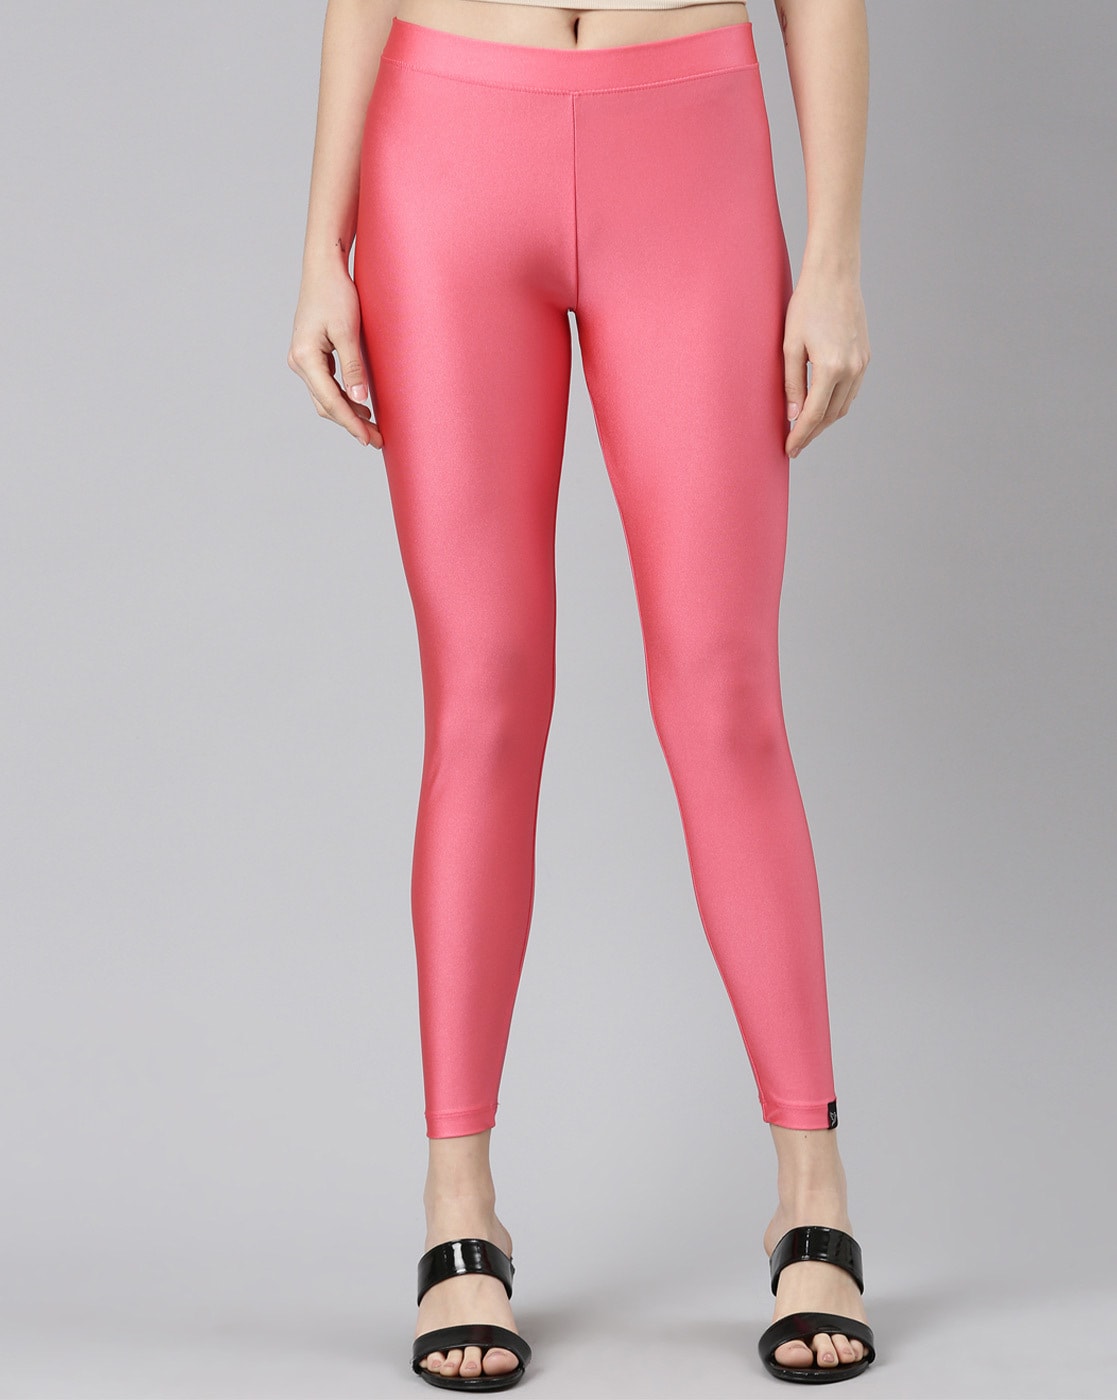 How many yards of Lycra does it take to make leggings? - Quora